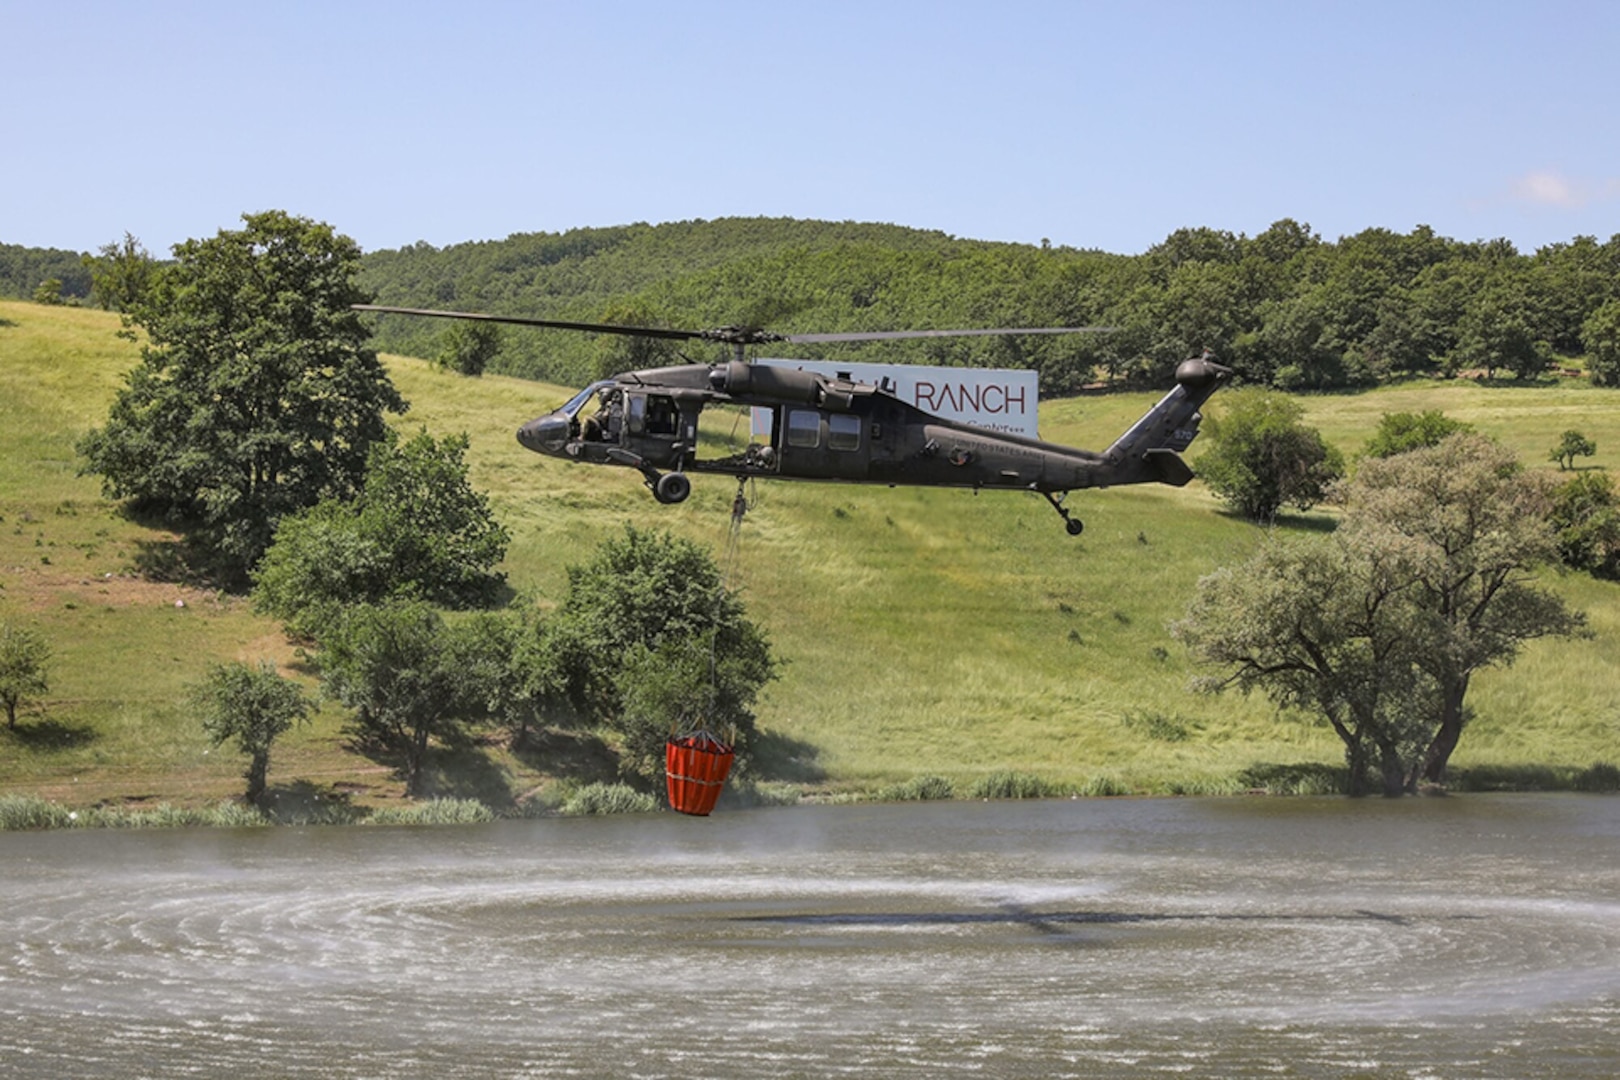 Virginia National Guard Soldiers assigned to 2nd Battalion, 224th Aviation Regiment, 29th Infantry Division conduct helicopter bucket aerial firefighting training near Gjilan, Kosovo, June 2, 2022.